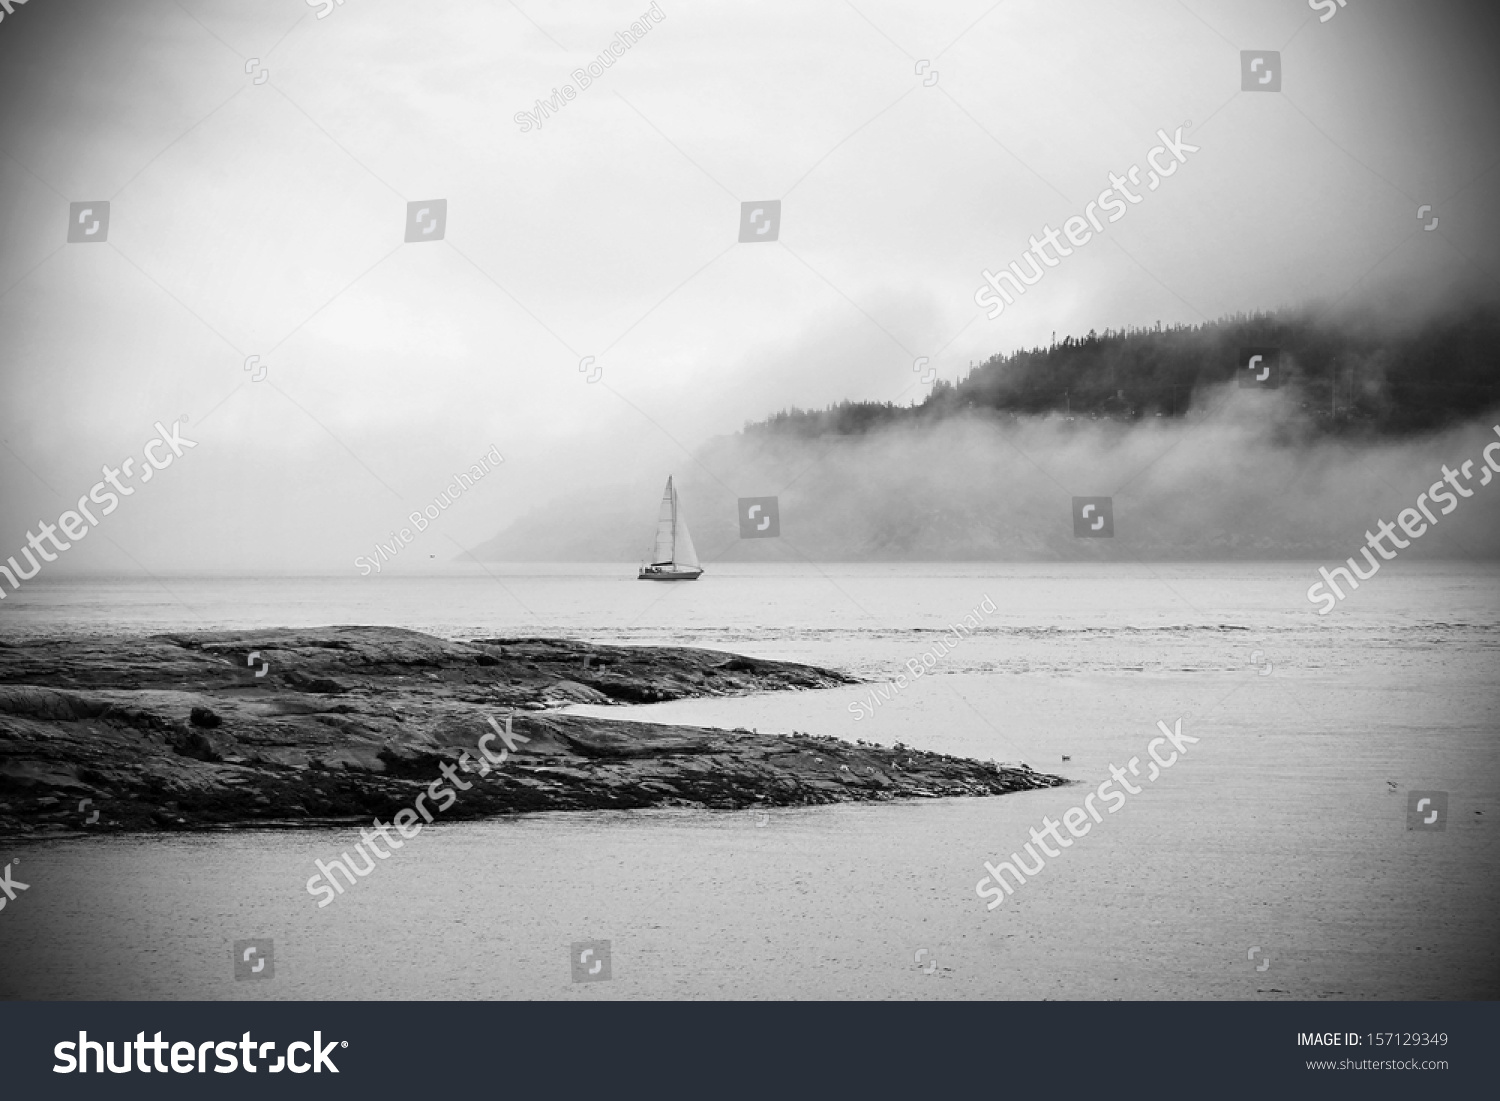 Romantic landscape: sailboat in the fog in dramatic  black and white #157129349